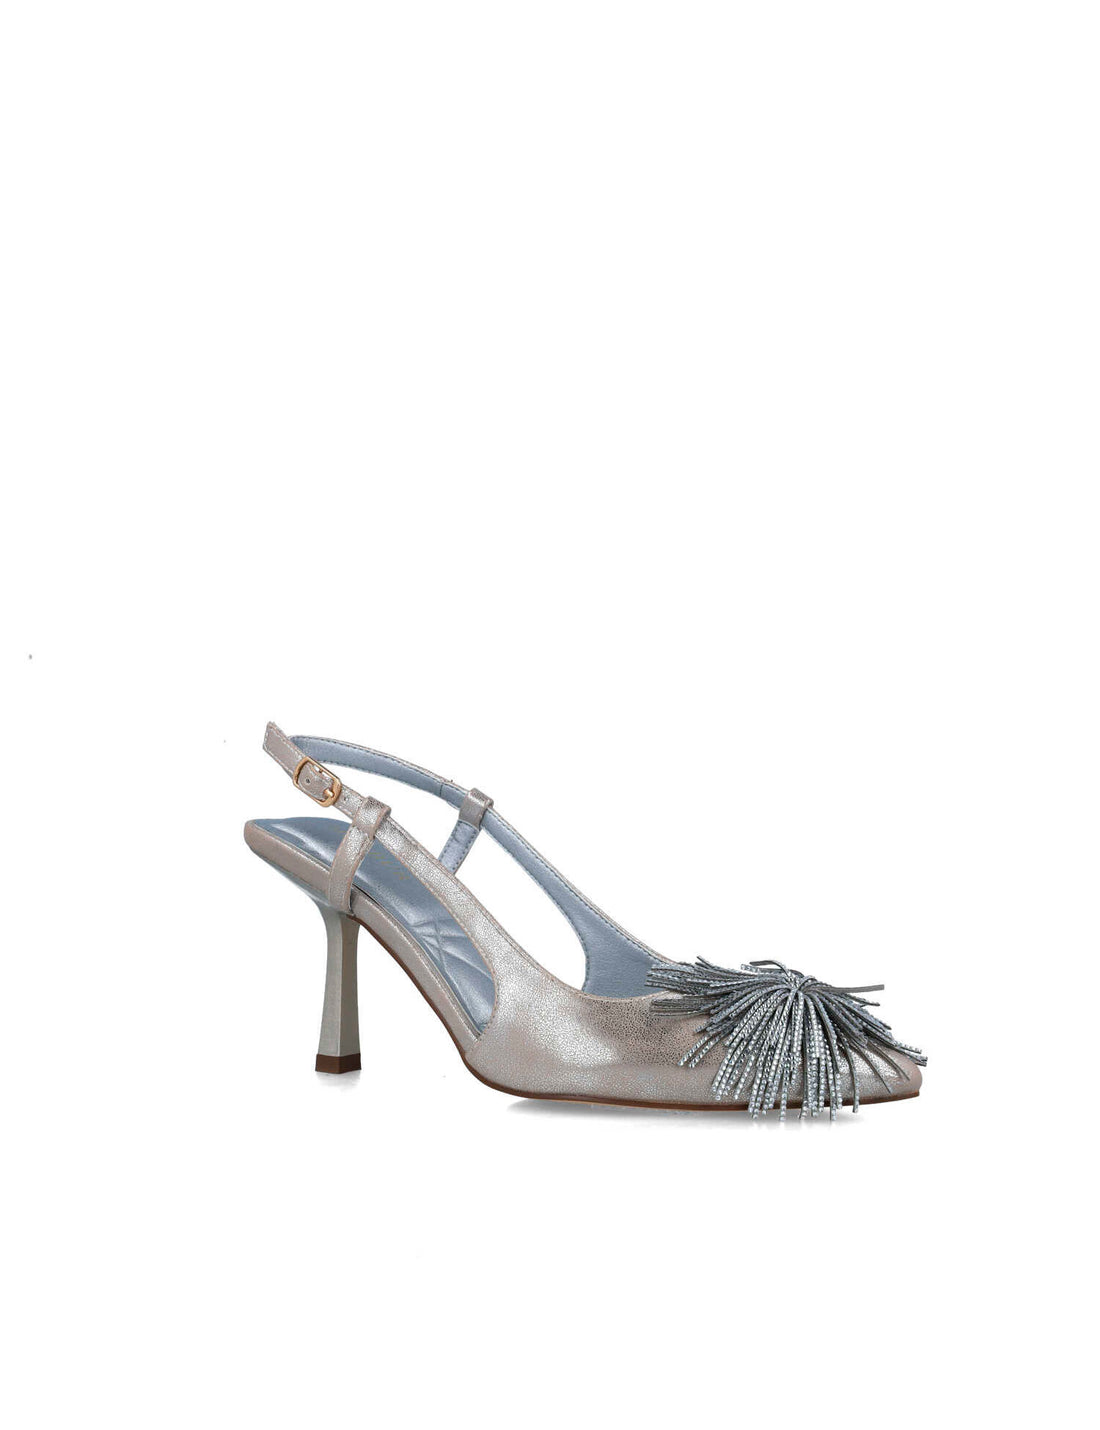 Silver Slingback Pumps With Fringe Piece_25409_09_02